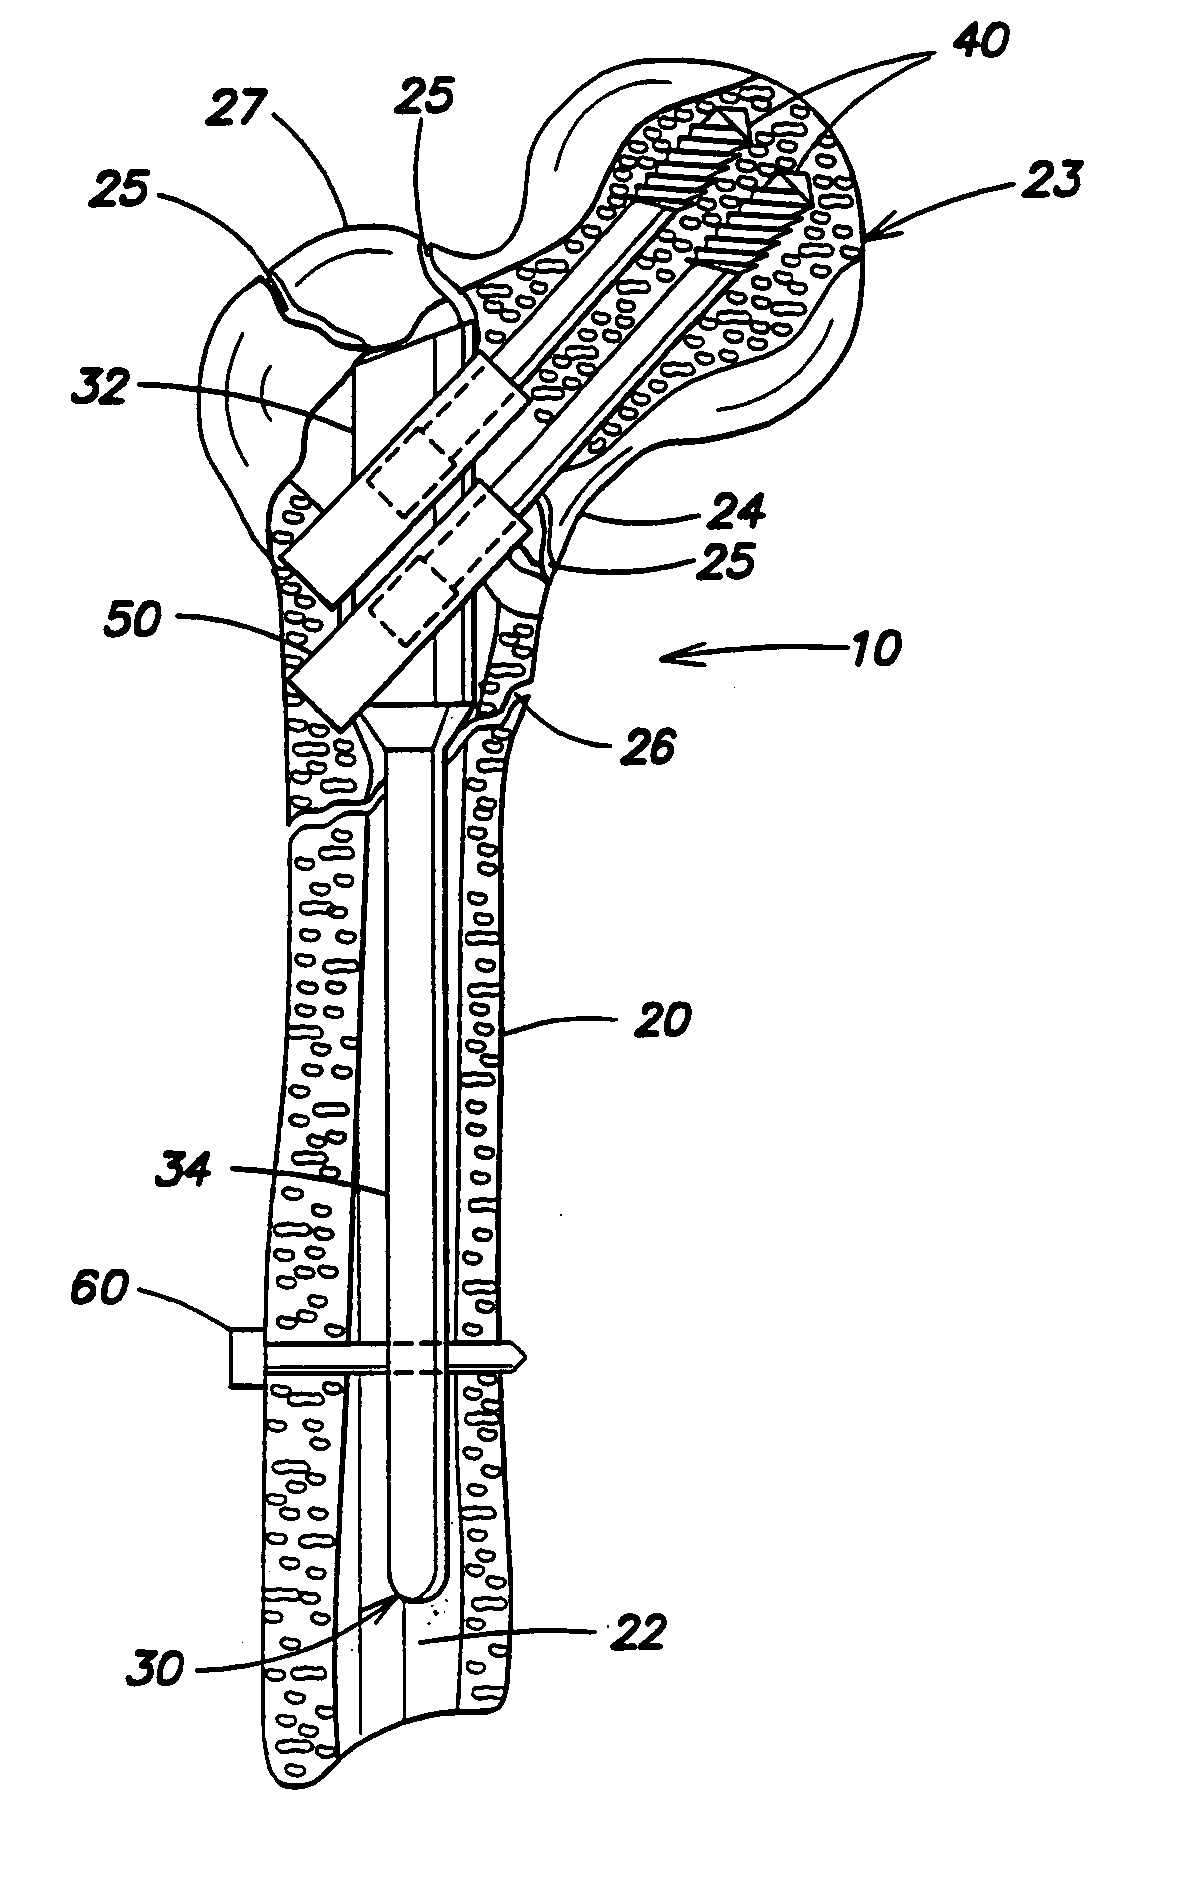 Intramedullary nail system and method for fixation of a fractured bone